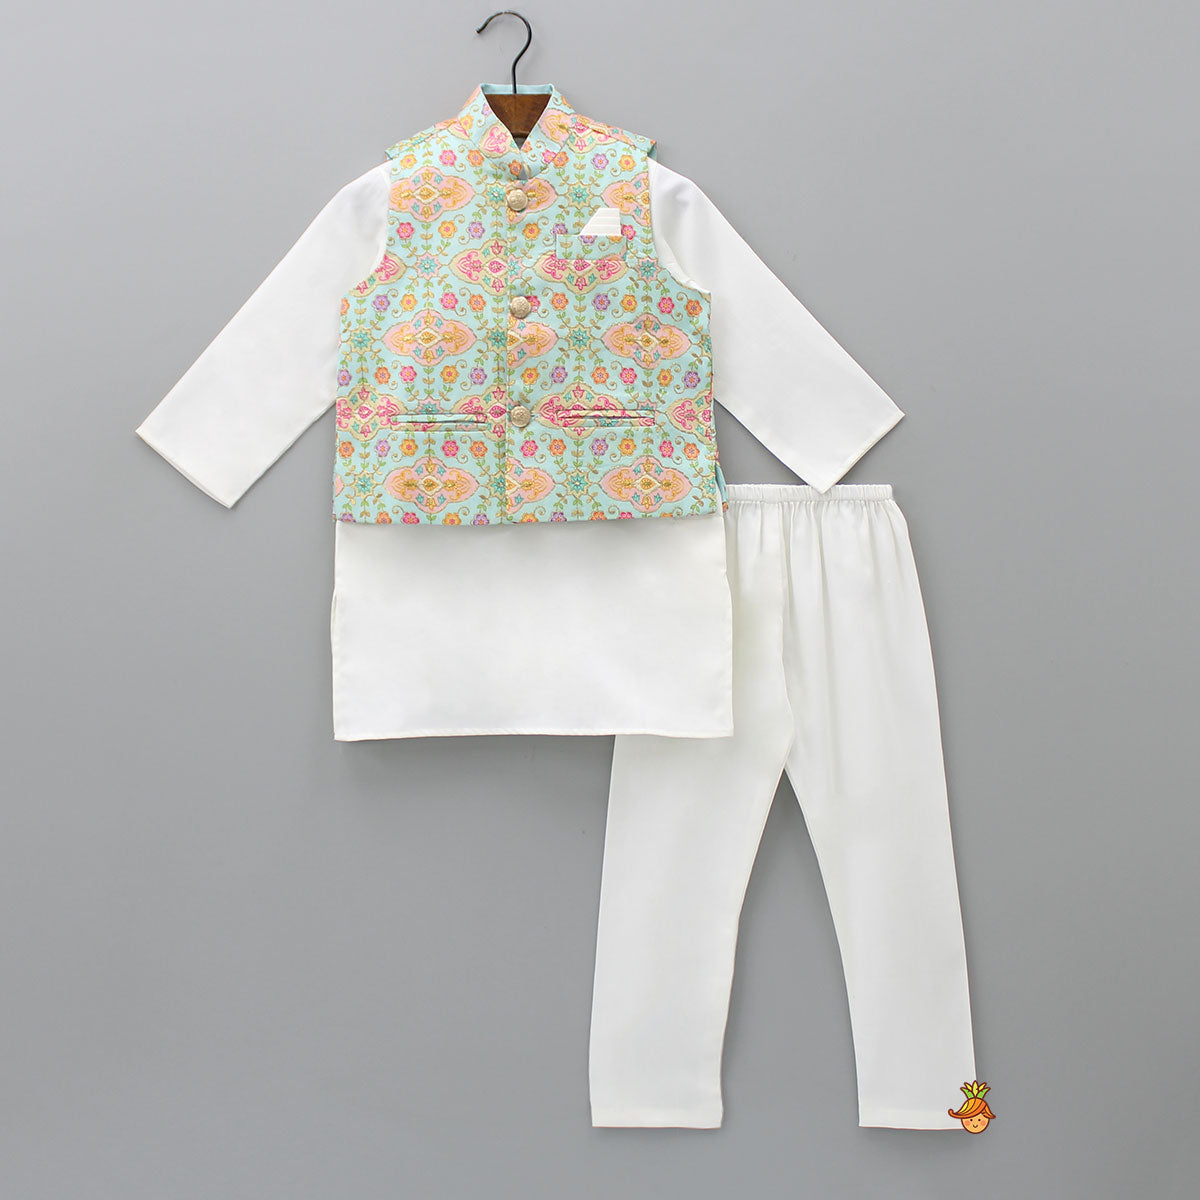 Pre Order: Zari Thread Embroidered And Floral Printed Ethnic Jacket With Off White Kurta And Pyjama